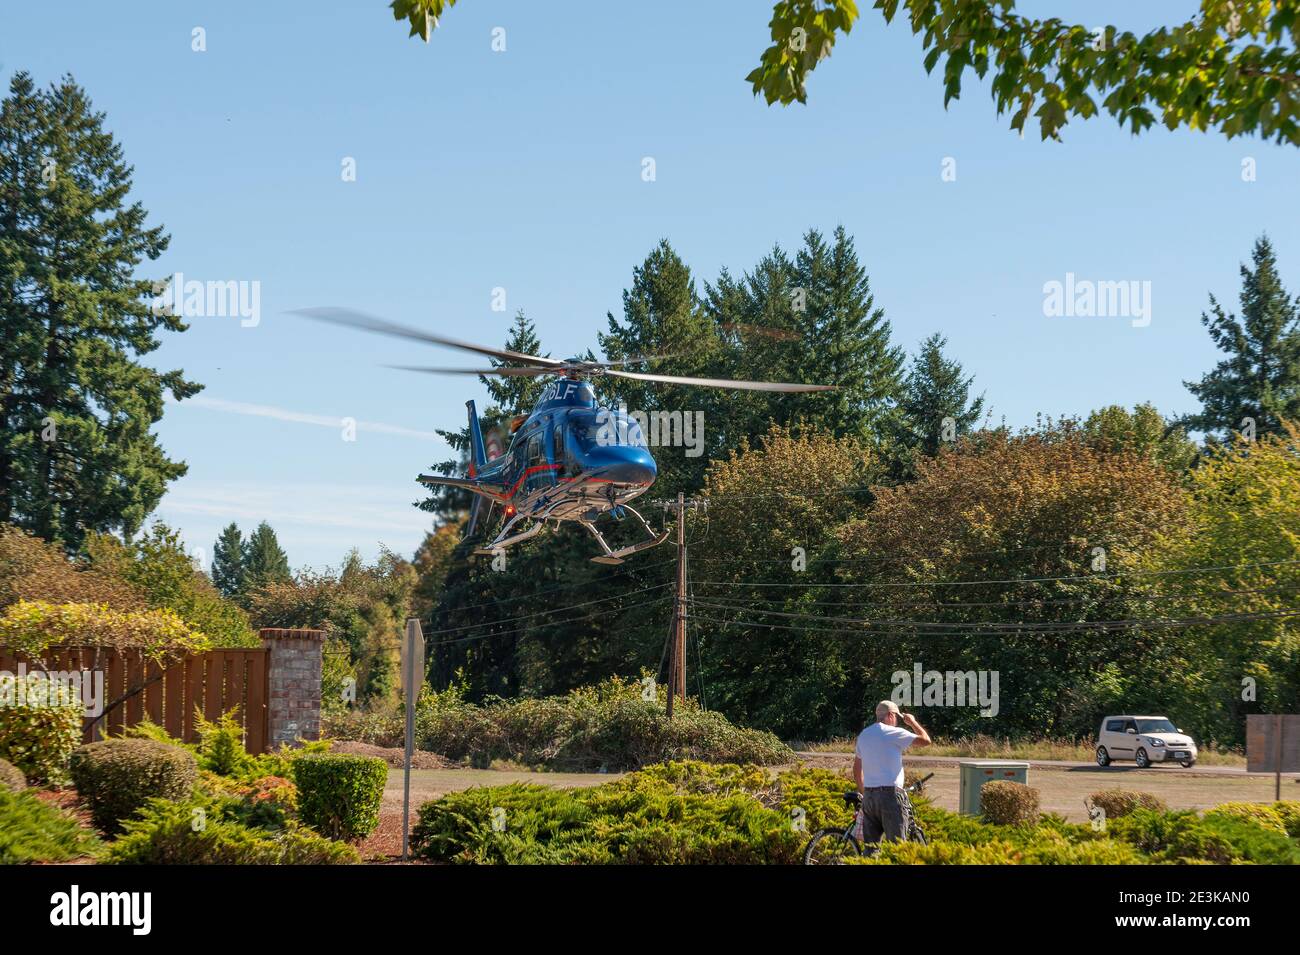 Lafayette, Oregon, USA - September, 19. 2015:  Life threatening injuries' calls for Life Flight to transport patient Stock Photo